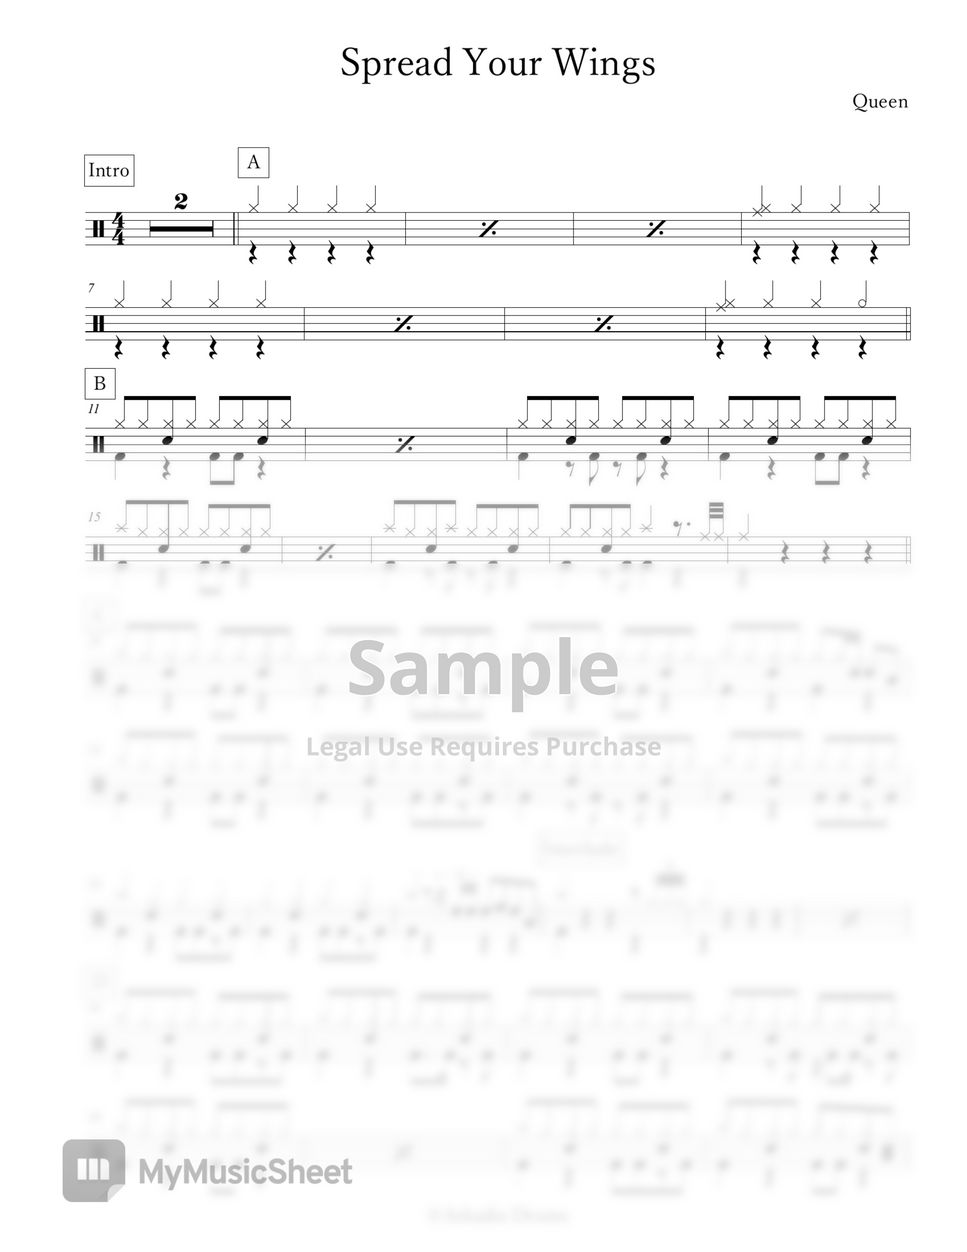 Queen - Spread Your Wings Sheets by Arkadia Drums